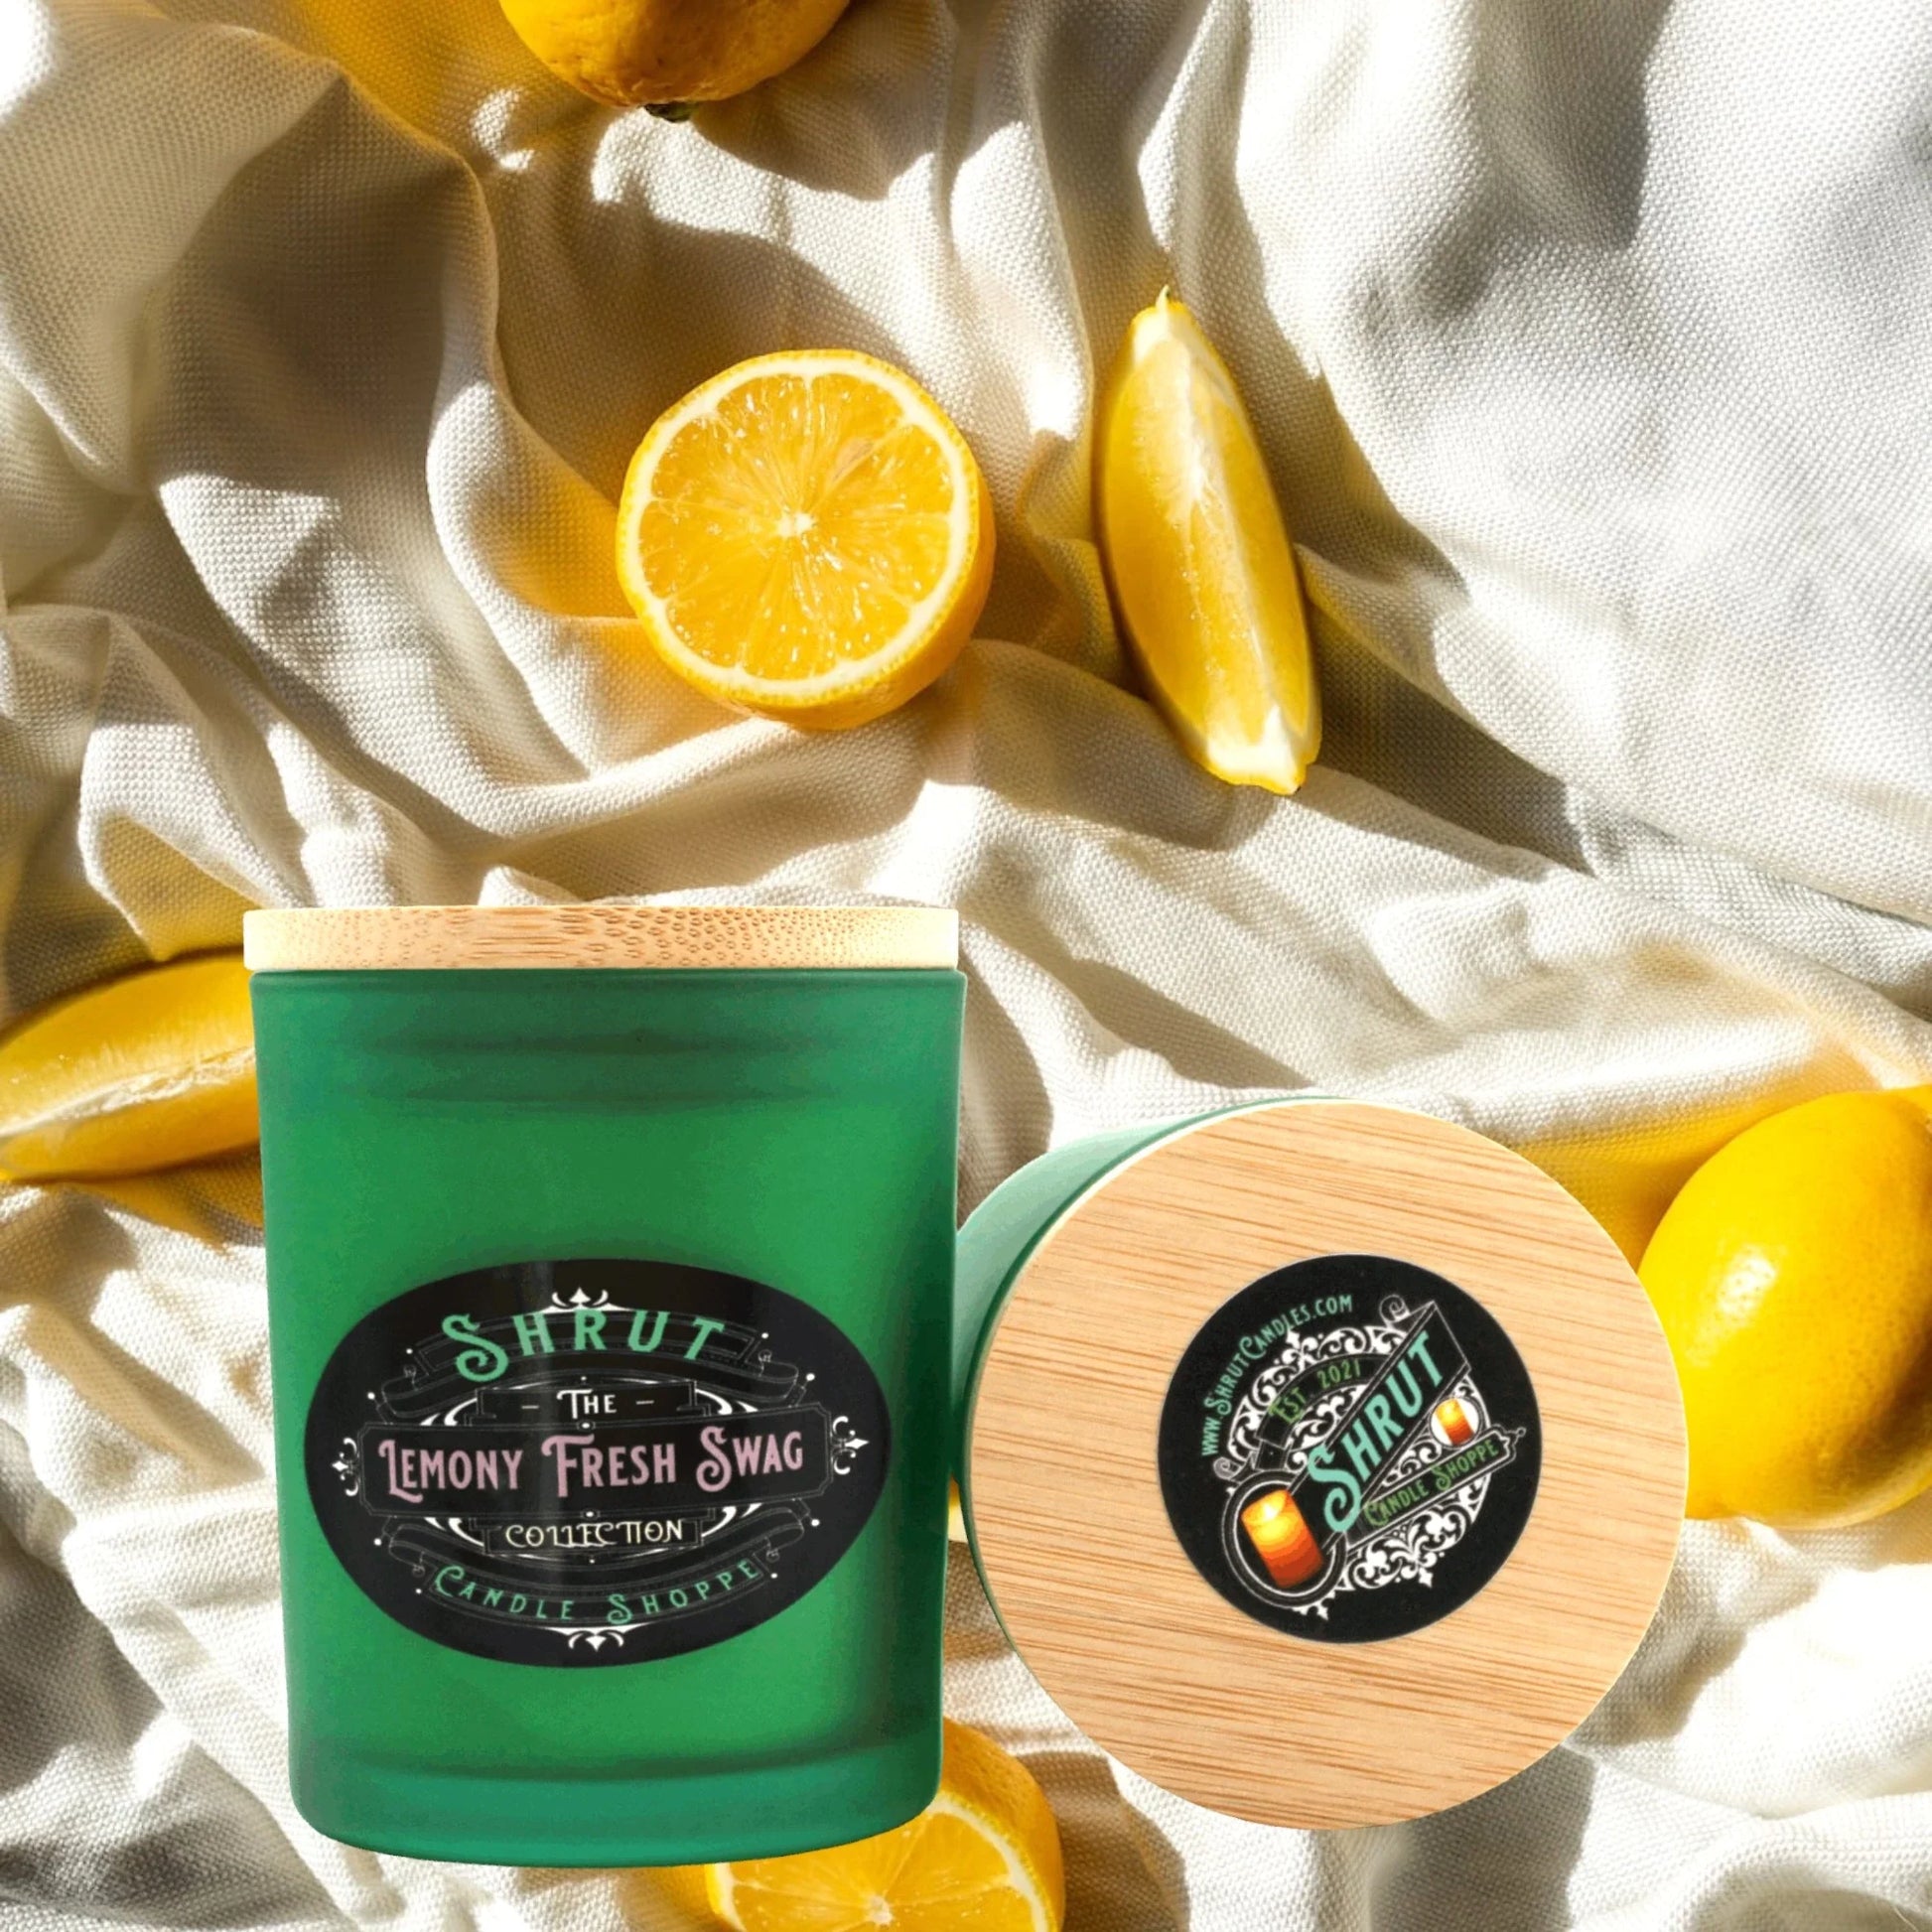 Lemony Fresh Swag Scented Candle - The Ultimate Sensory Pick-me-up